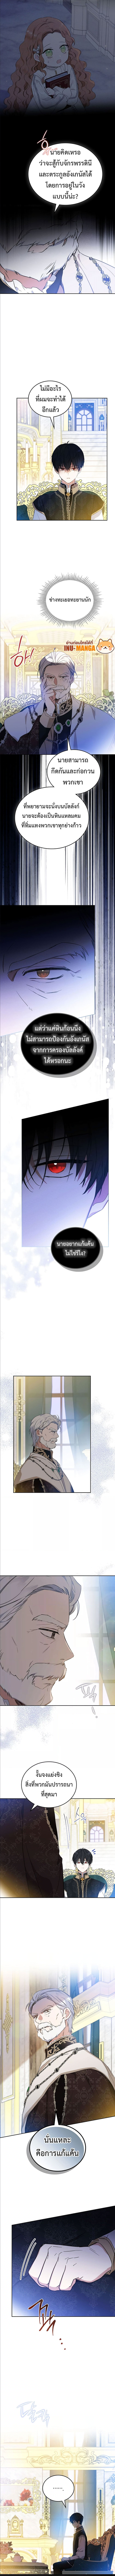 In This Life, I Will Be the Lord เธ•เธญเธเธ—เธตเน 104 (6)